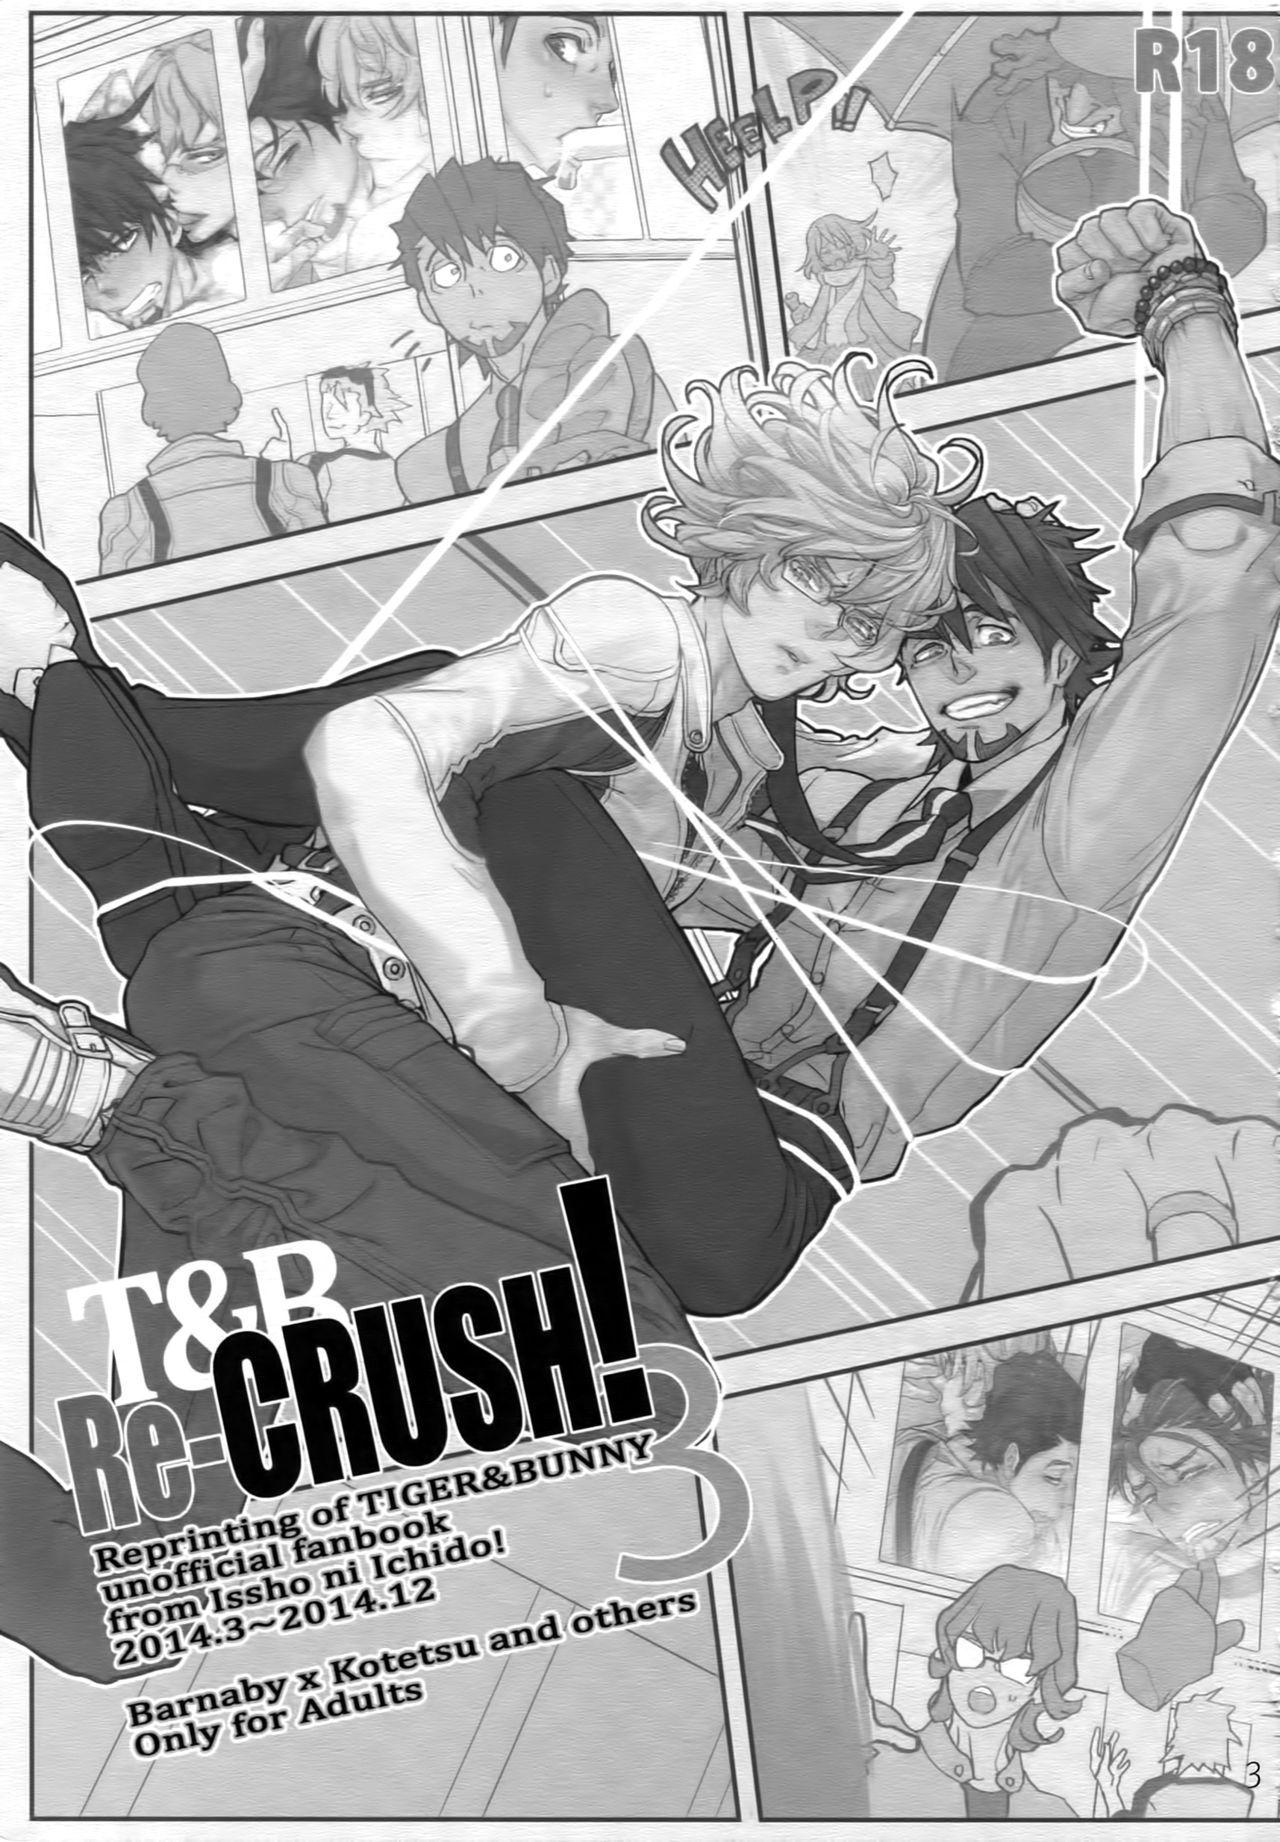 Athletic T&B Re-CRUSH!3 - Tiger and bunny Bigbutt - Page 2